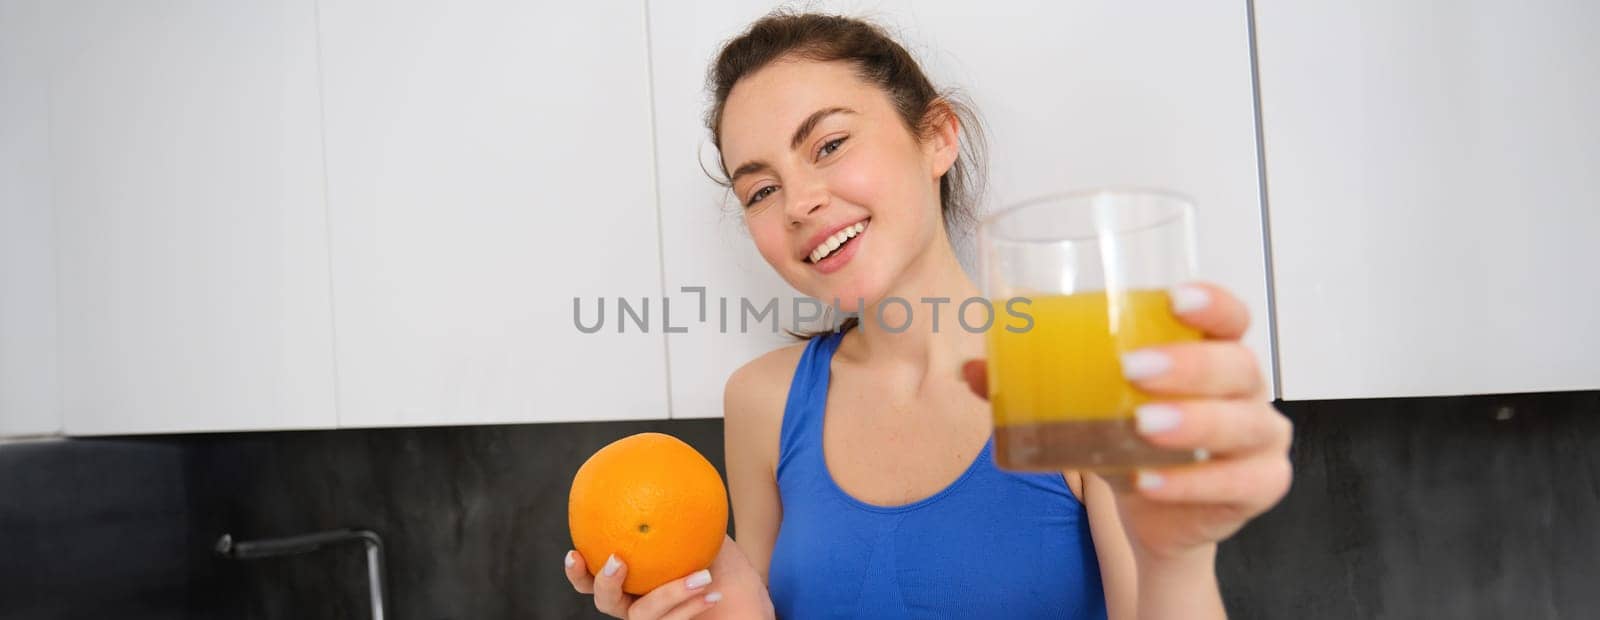 Portrait of smiling fitness woman, offering orange juice, holding fruit and a glass in hands, posing in kitchen in activewear.